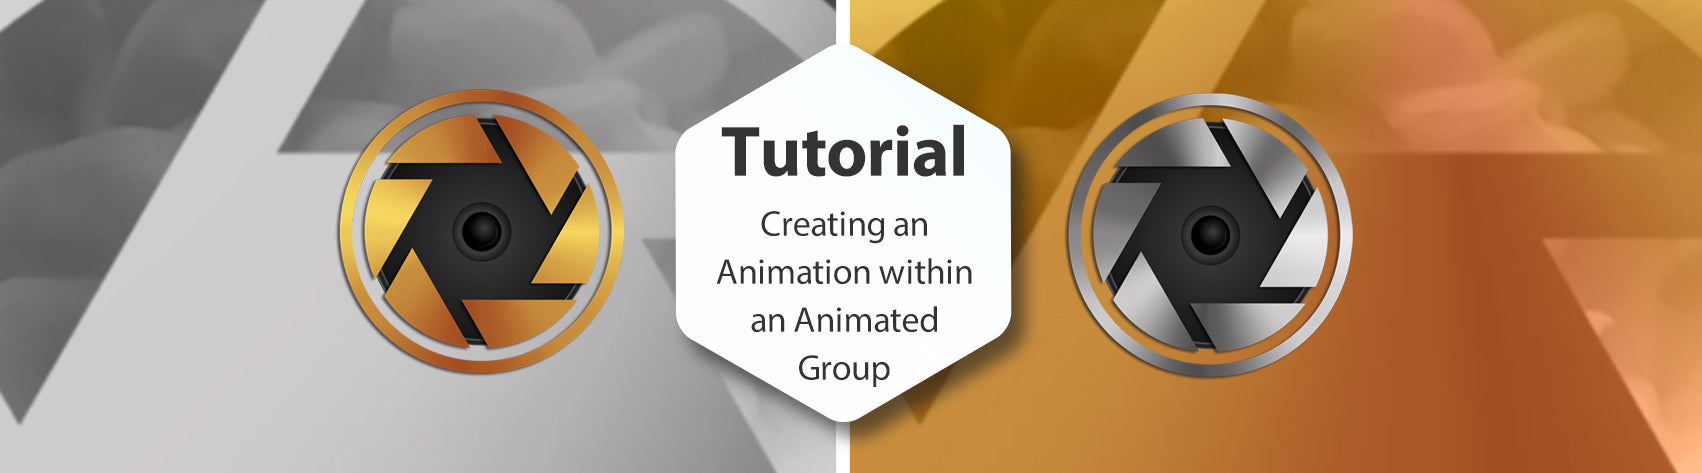 Lesson - Creating an Animation Within an Animated Group